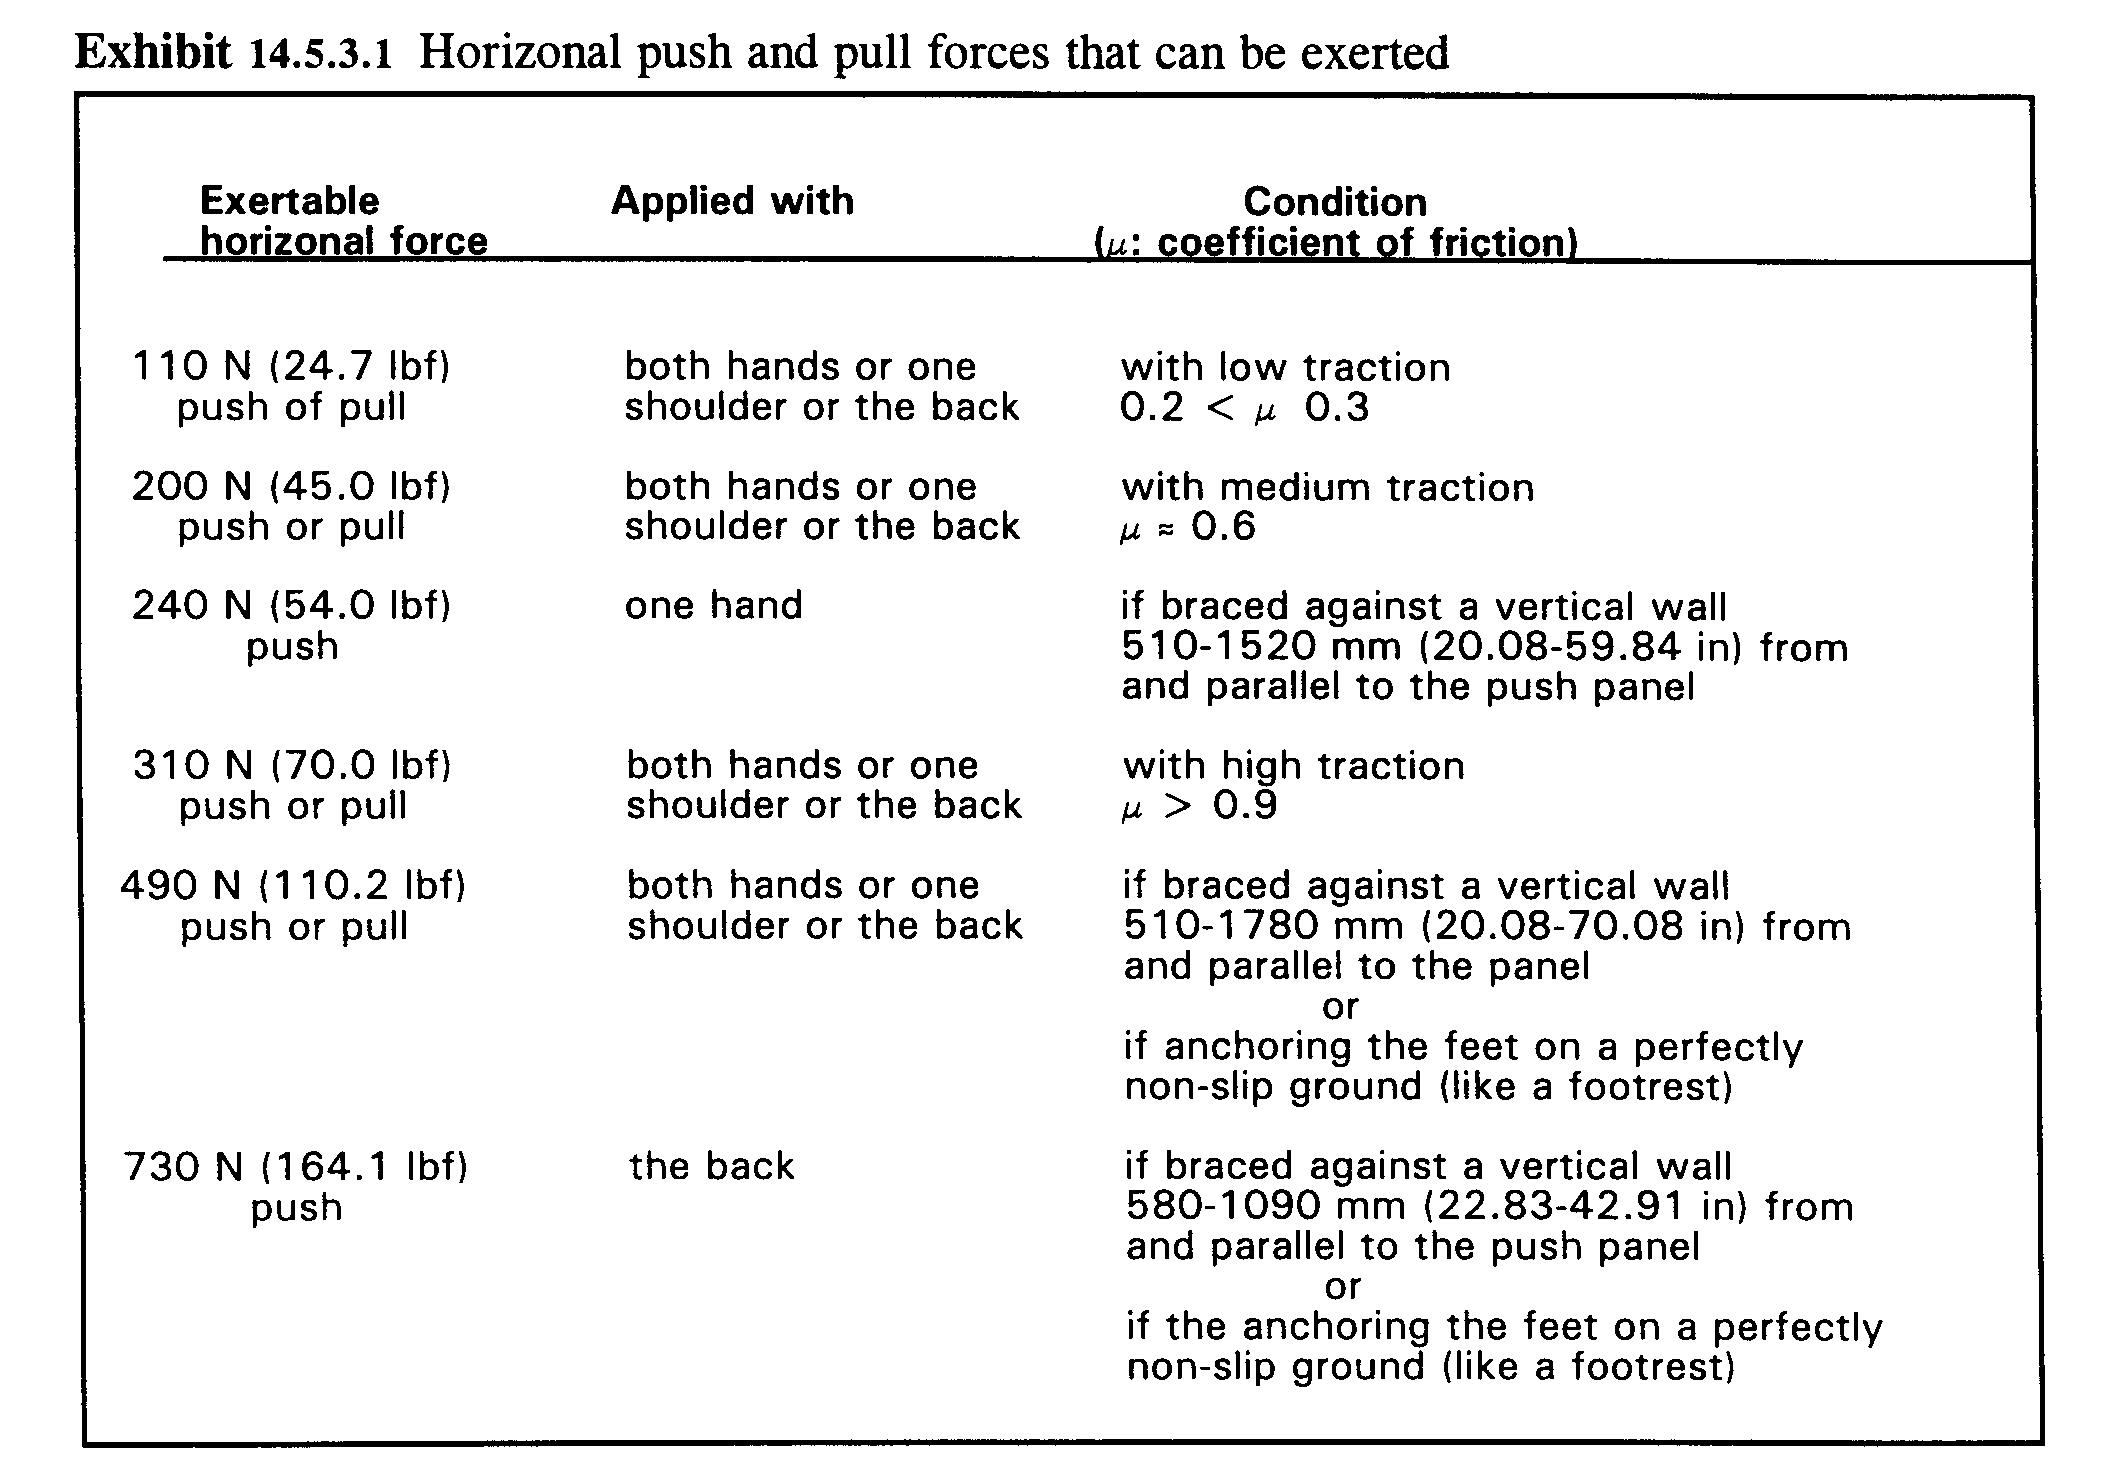 Table from FAA Human Factors Design Standard, Chapter 14 showing exertable horizon forces when using hands, shoulder, and back and the related coefficient of friction.